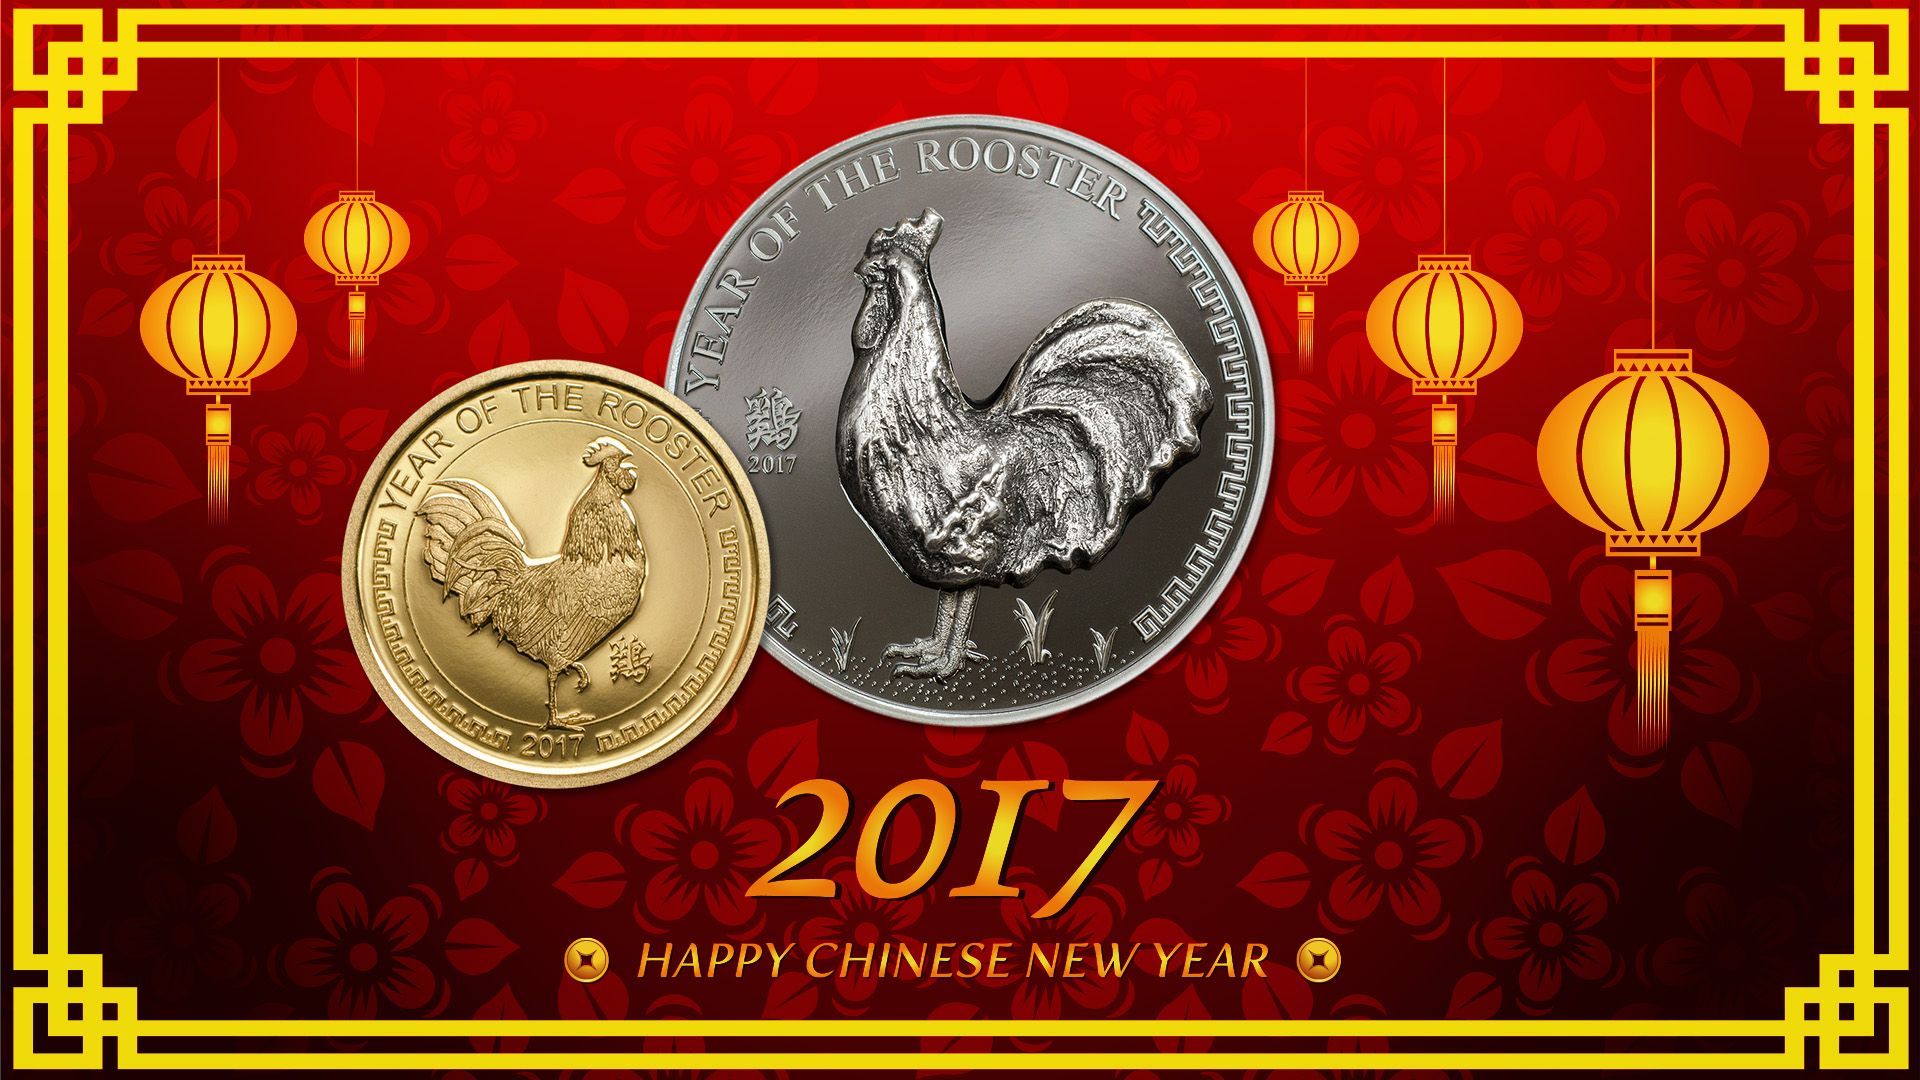 2017 Lunar Year Series Year of the Rooster Coins